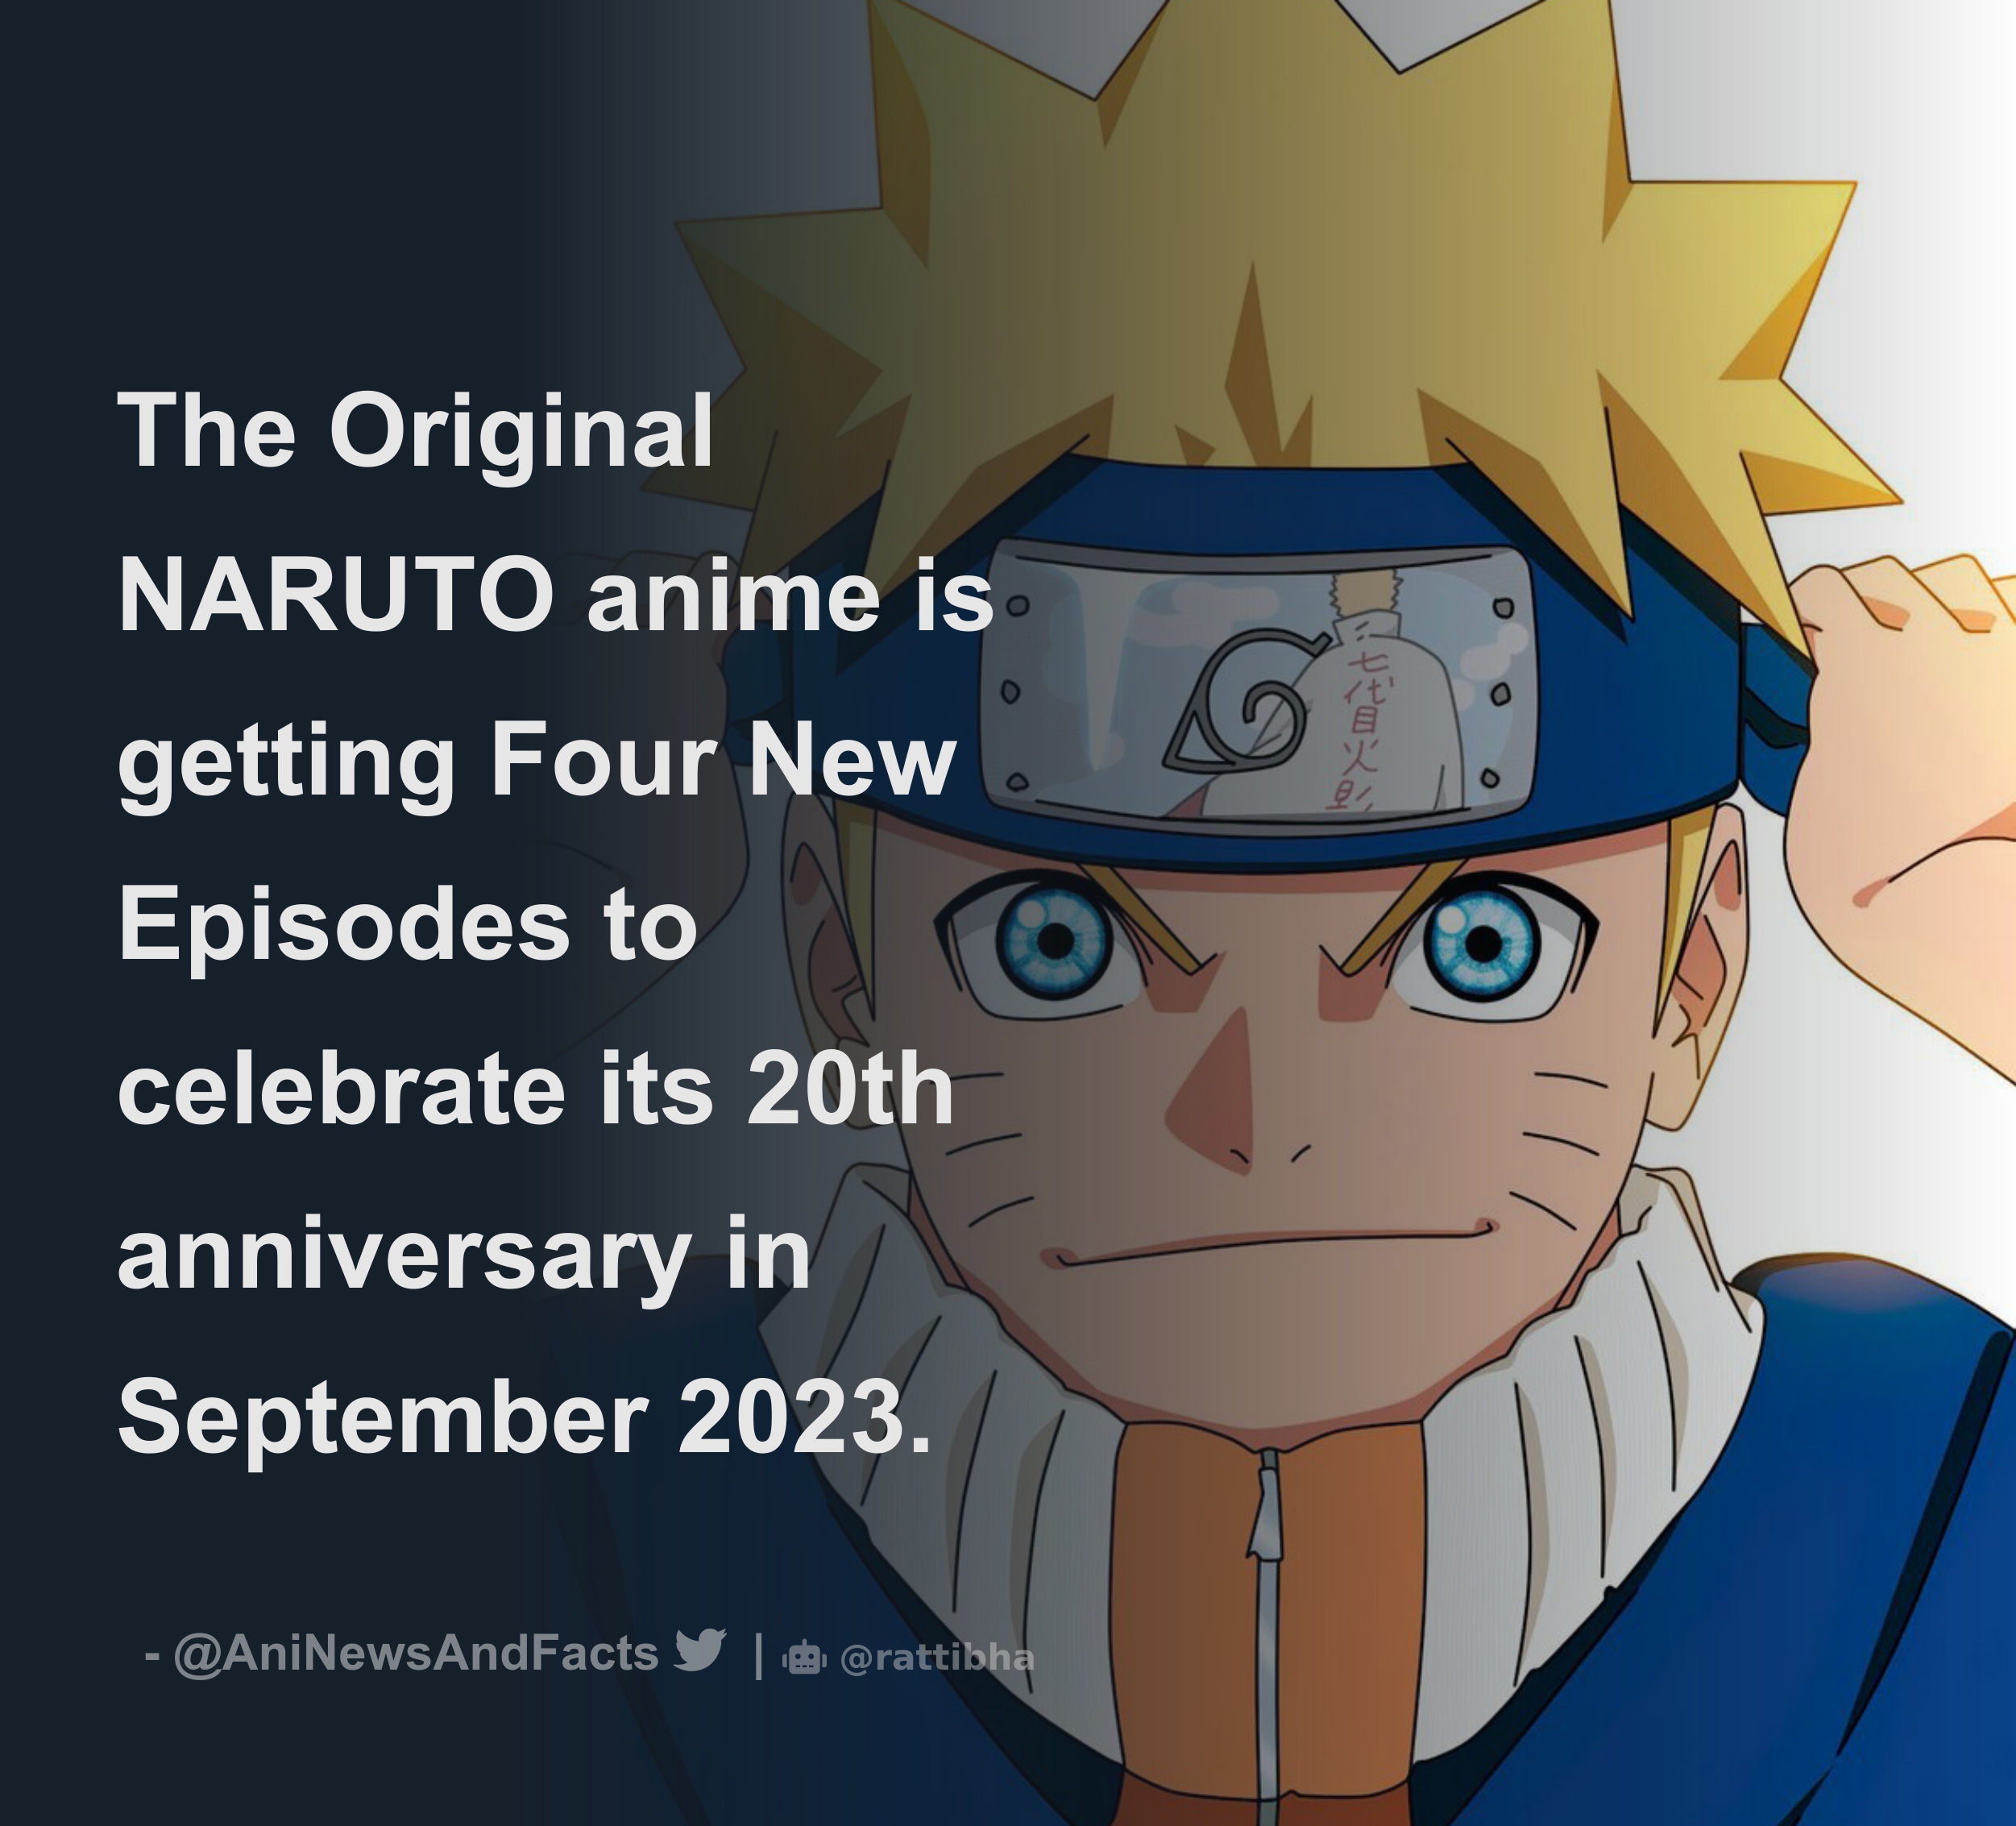 New Episodes For Original 'Naruto' Anime Coming In September